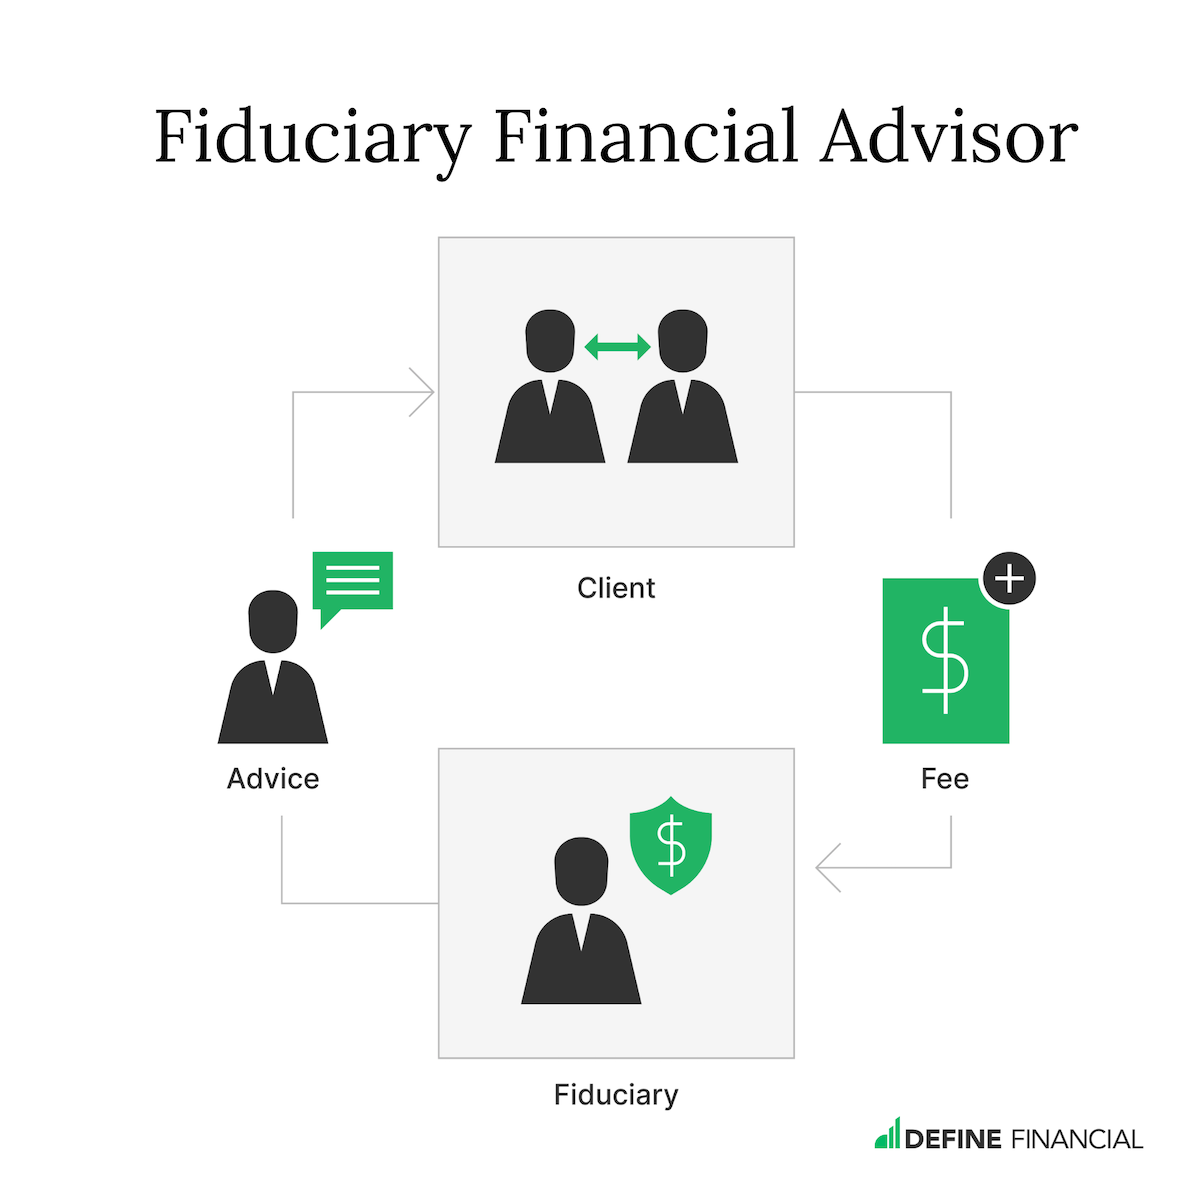 Graphic showing that a fiduciary financial advisor only receives compensation from their client.